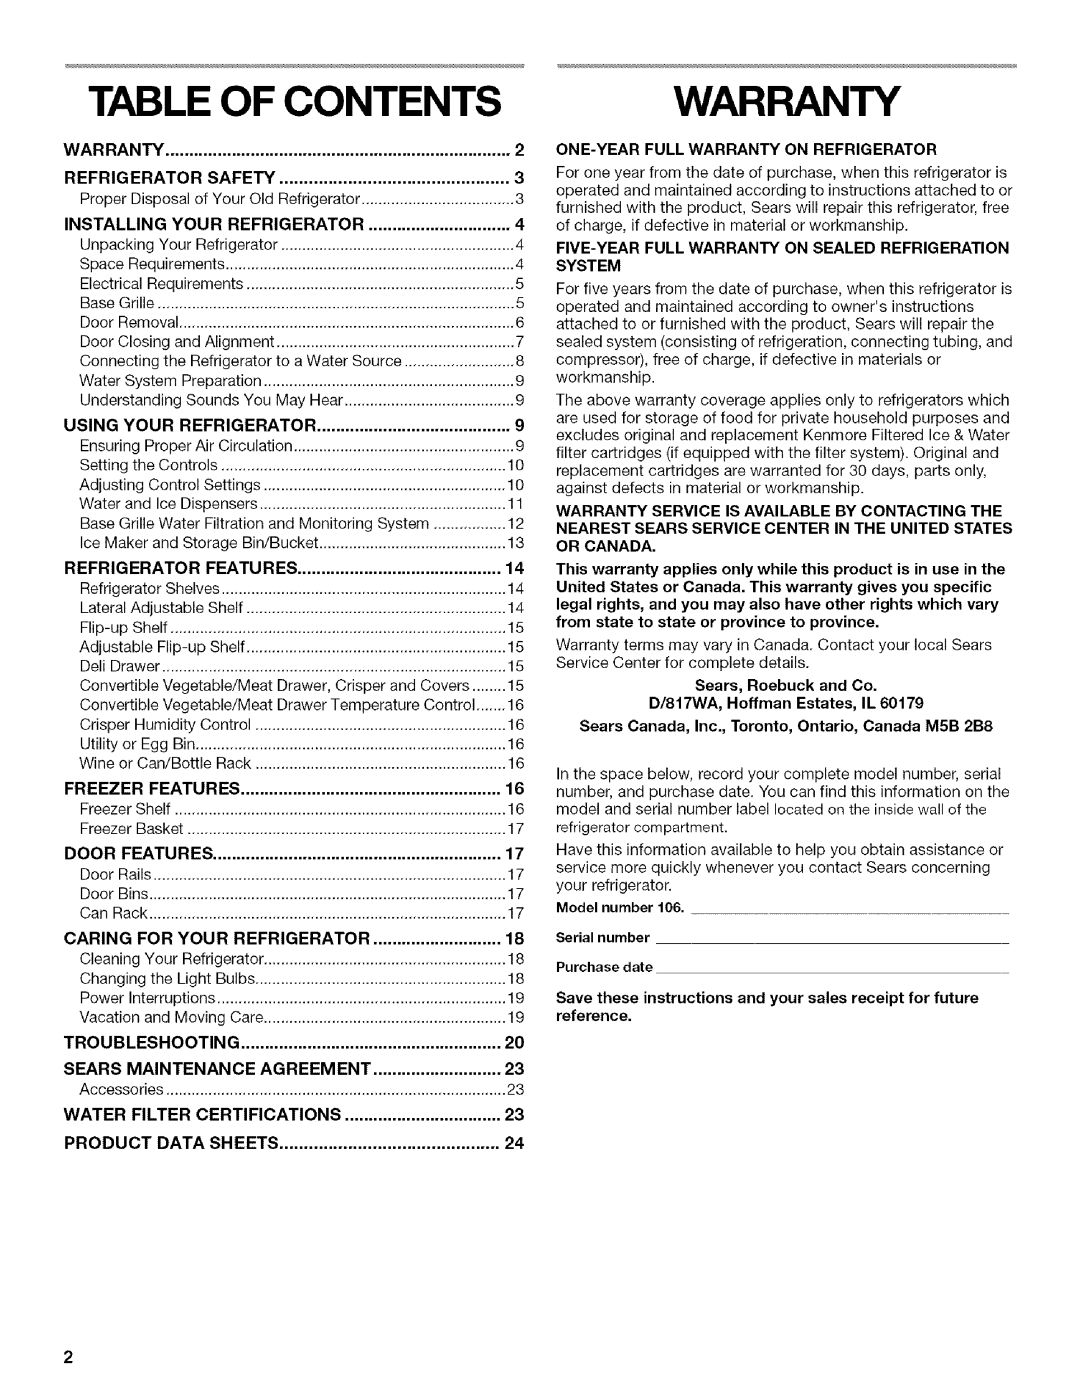 Kenmore 2205960 manual Warranty, Table Of Contents, Product Data Sheets 